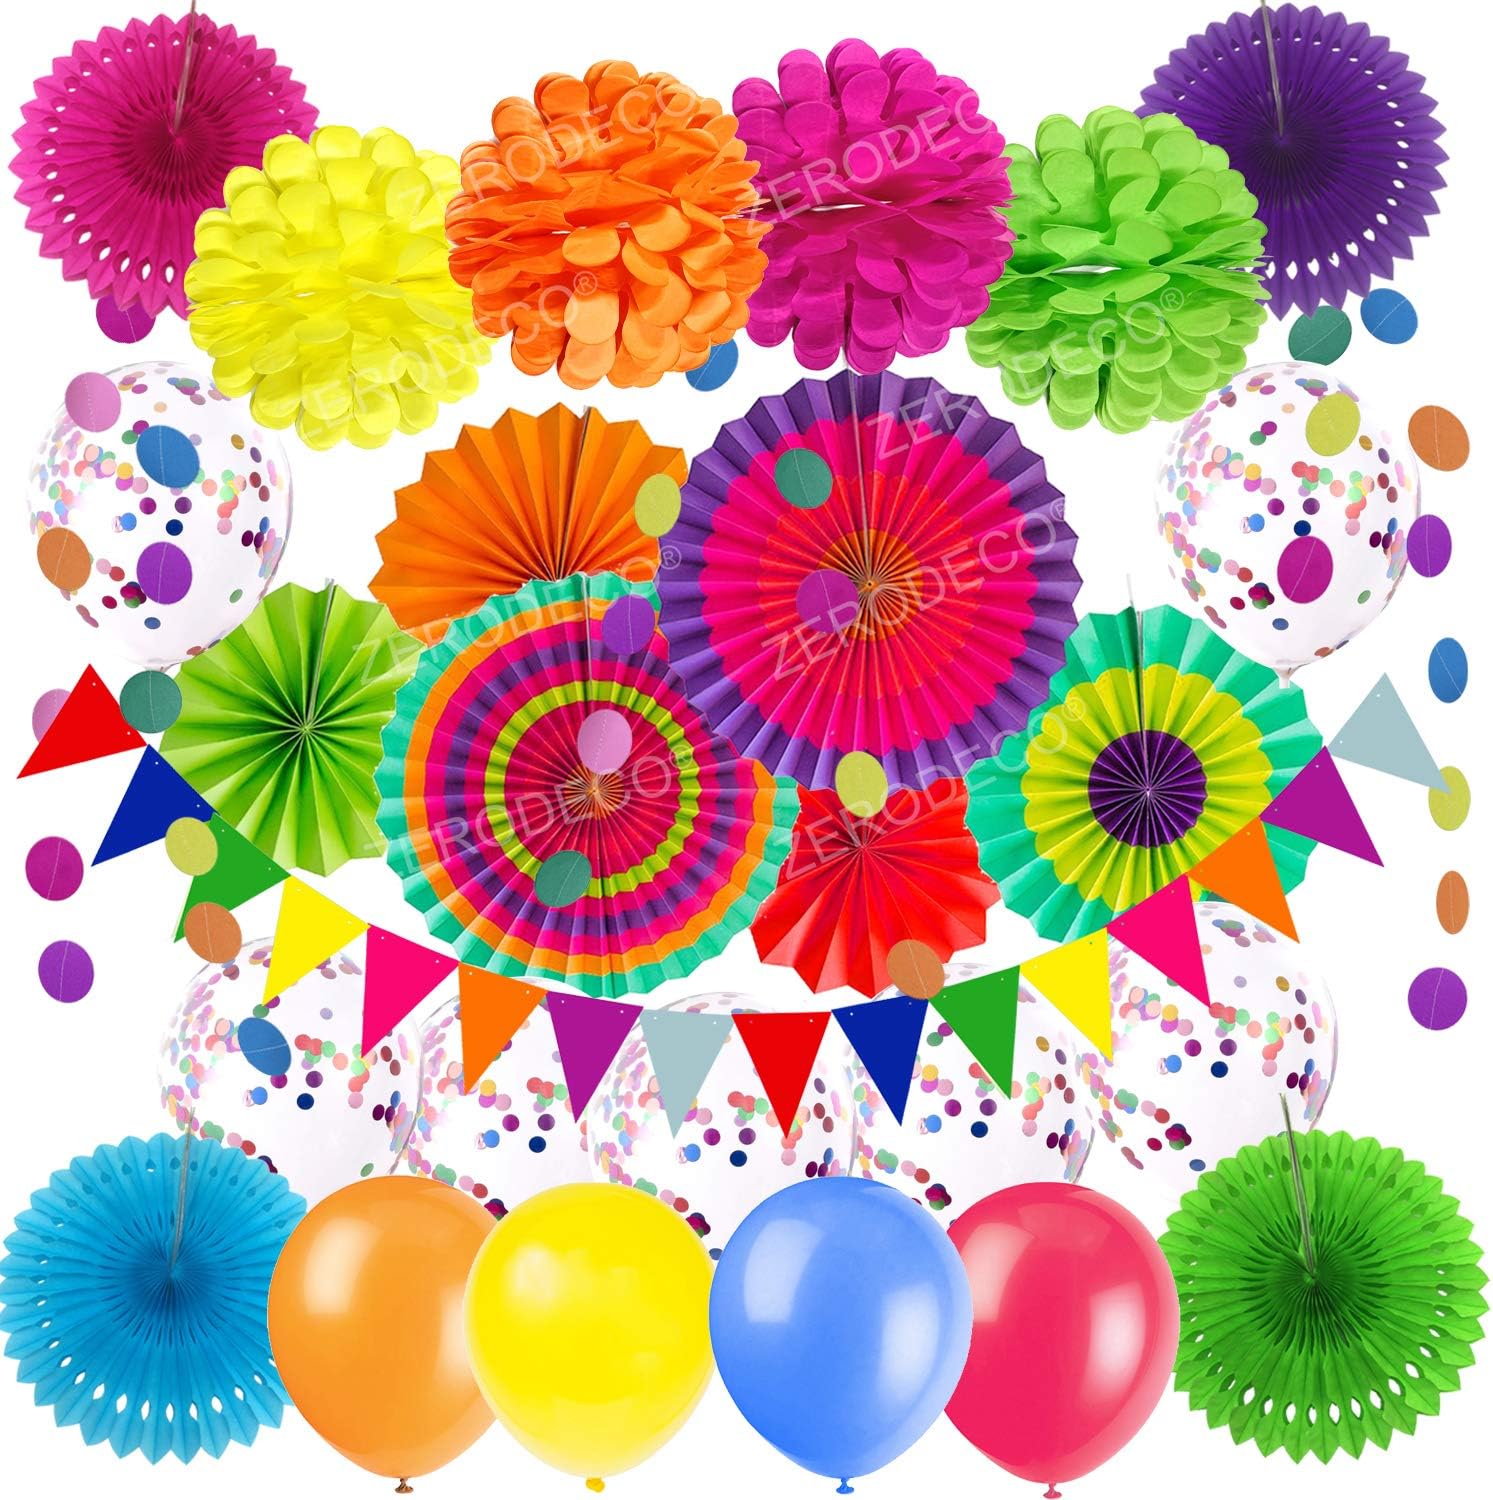 ZERODECO Party Decoration, Multi-colored Paper Fans Pom Poms Flowers Garlands Confetti Latex Balloons String Polka Dot Triangle Bunting Flags for Birthday Cinco De Mayo Fiesta Mexican Party